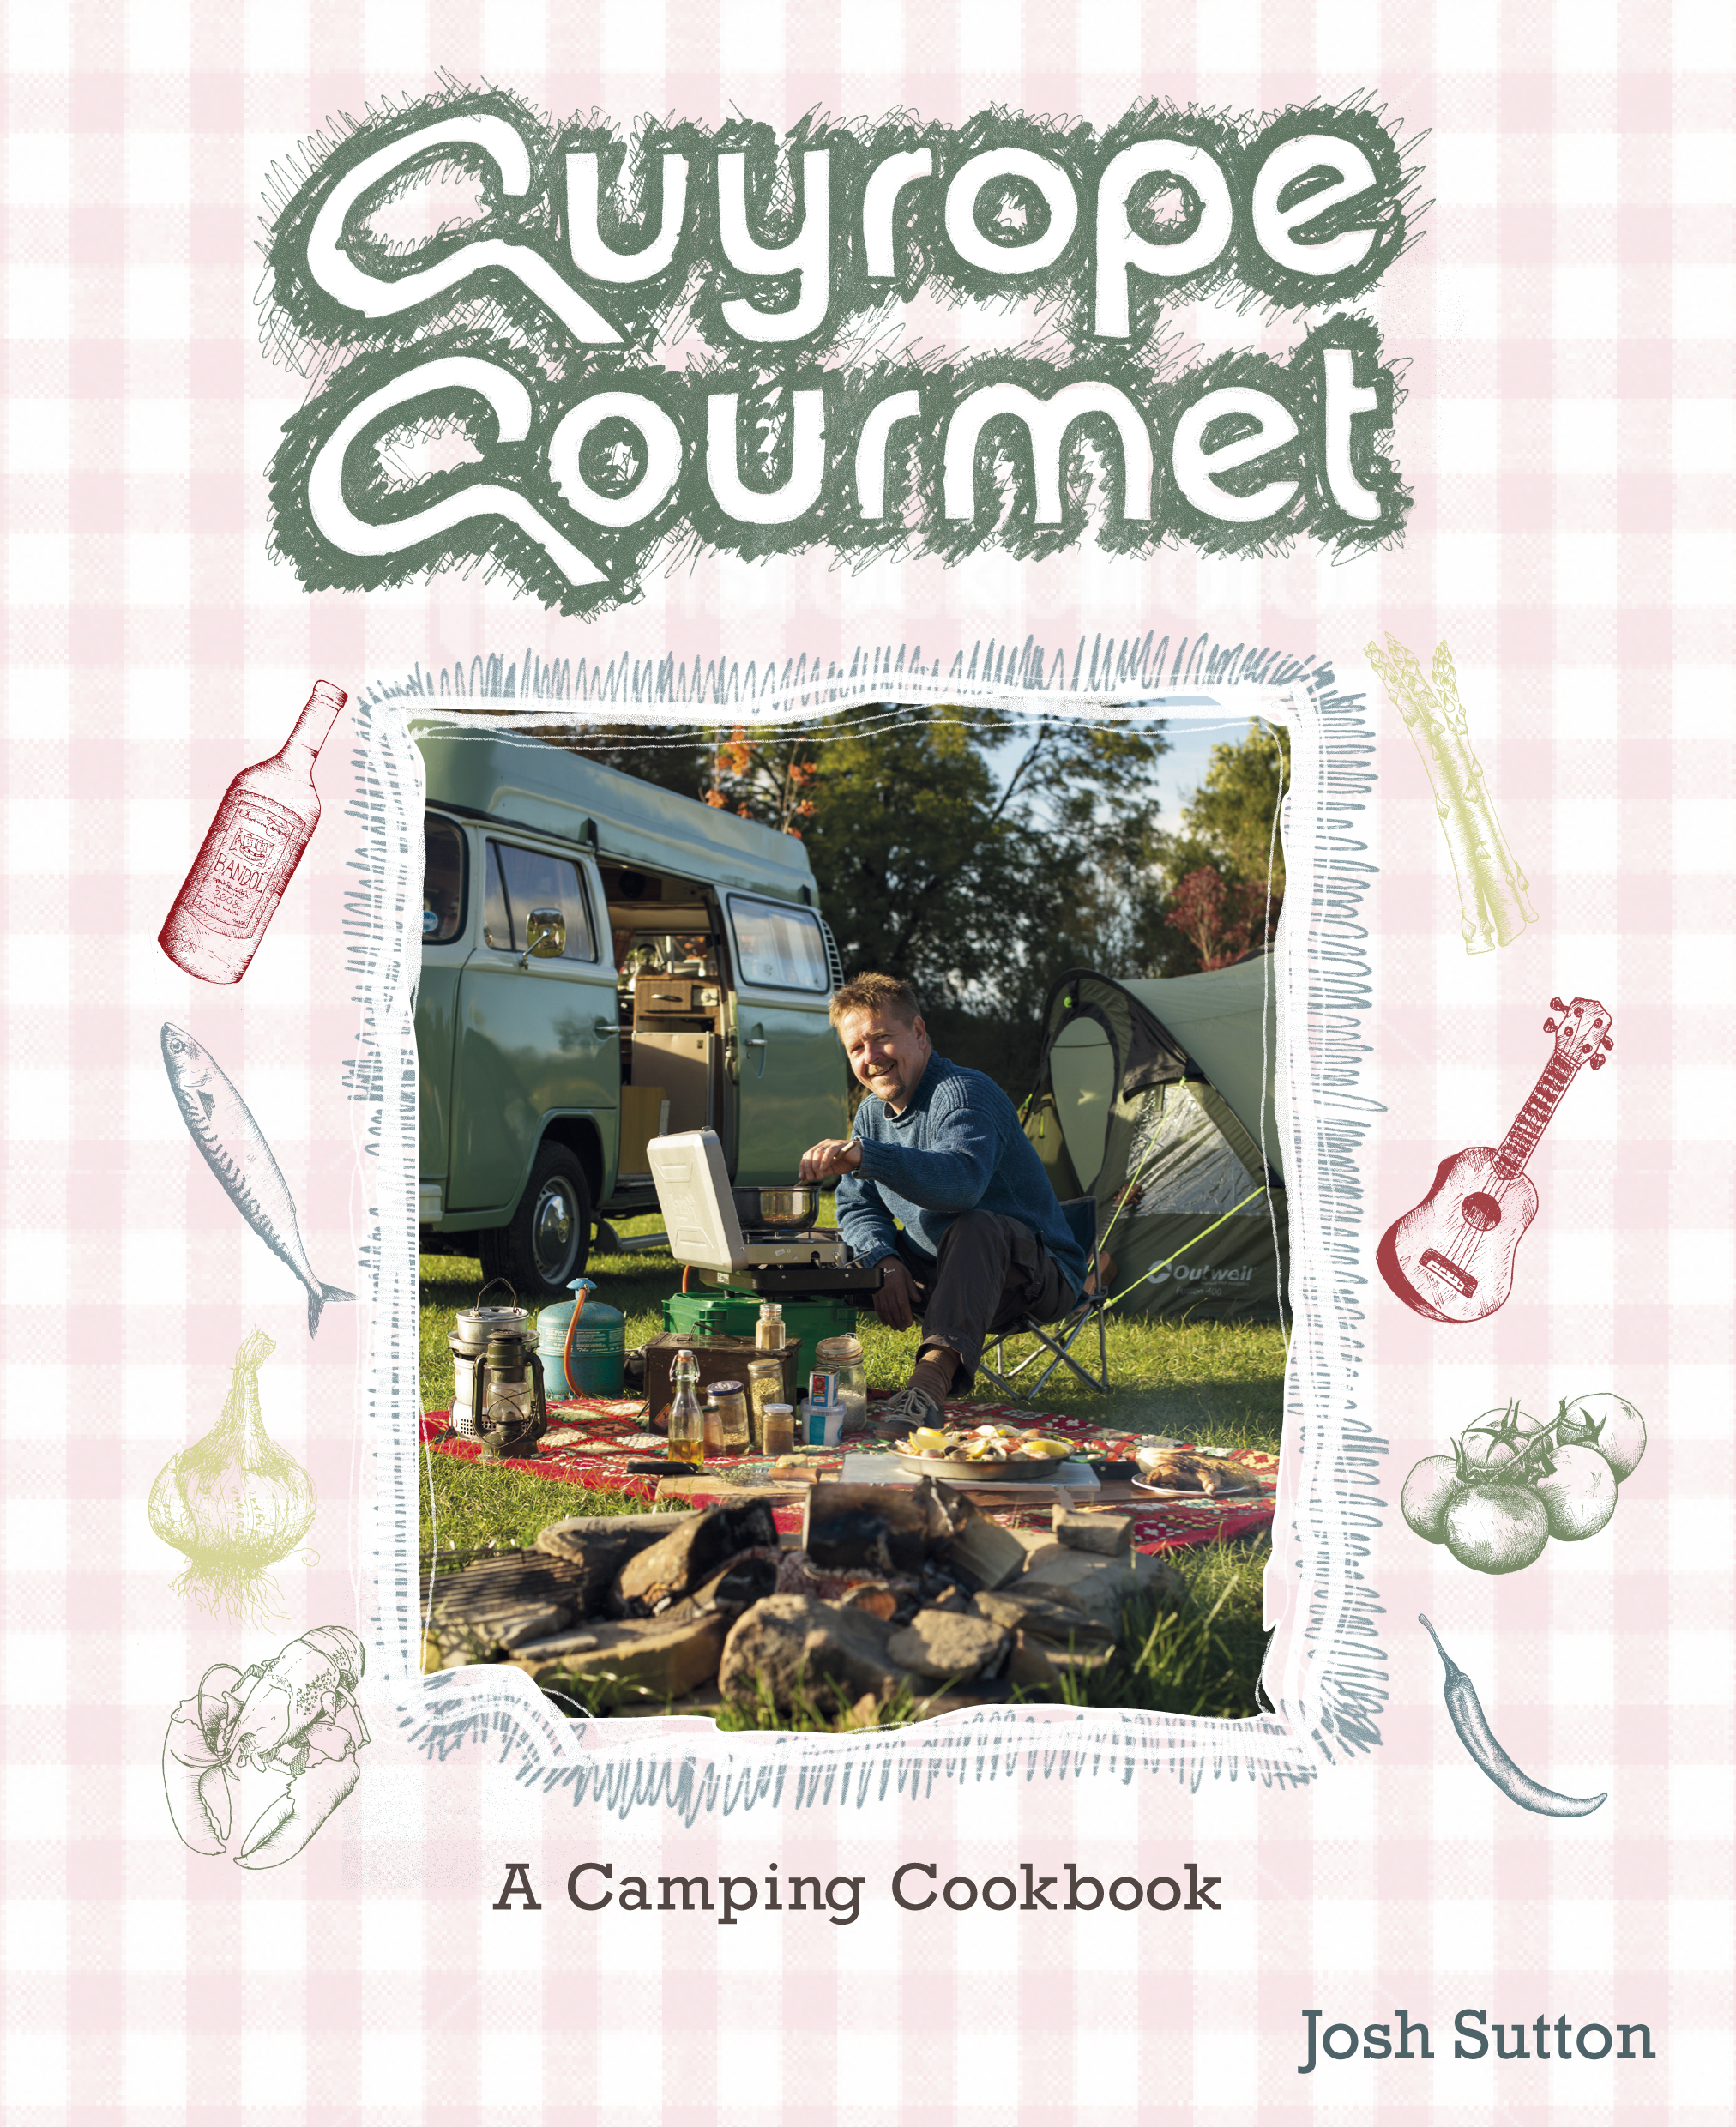 GUYROPE_GOURMET_Cover_full_high_res